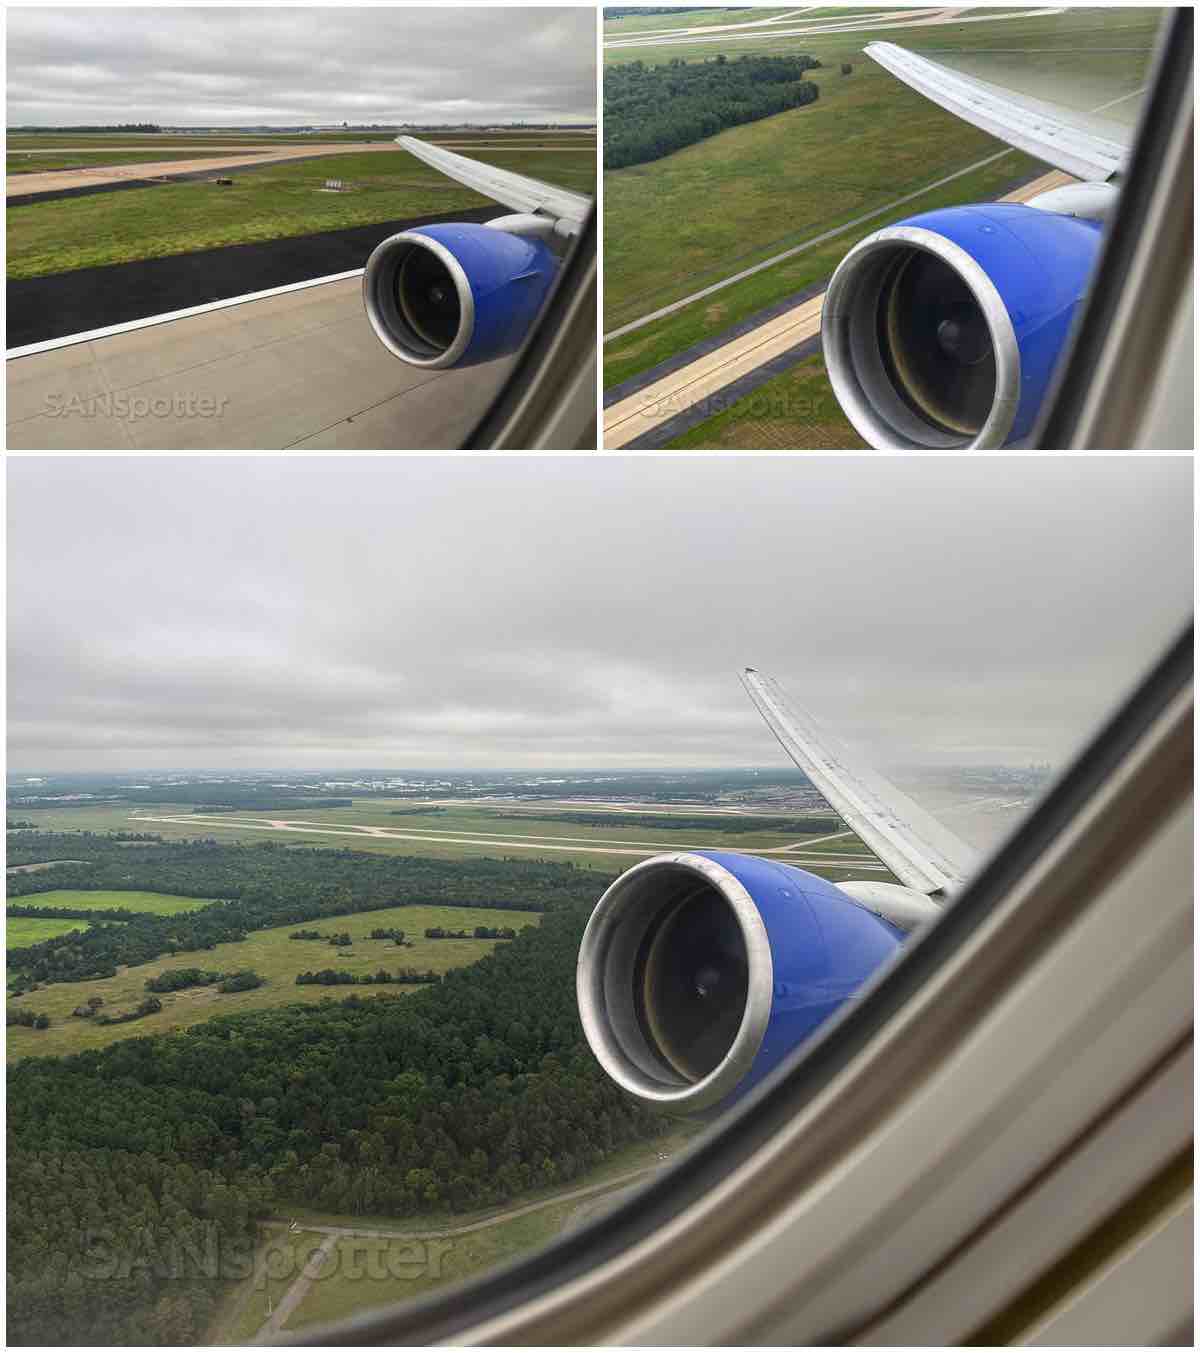 United 777–200 takeoff from Washington Dulles airport